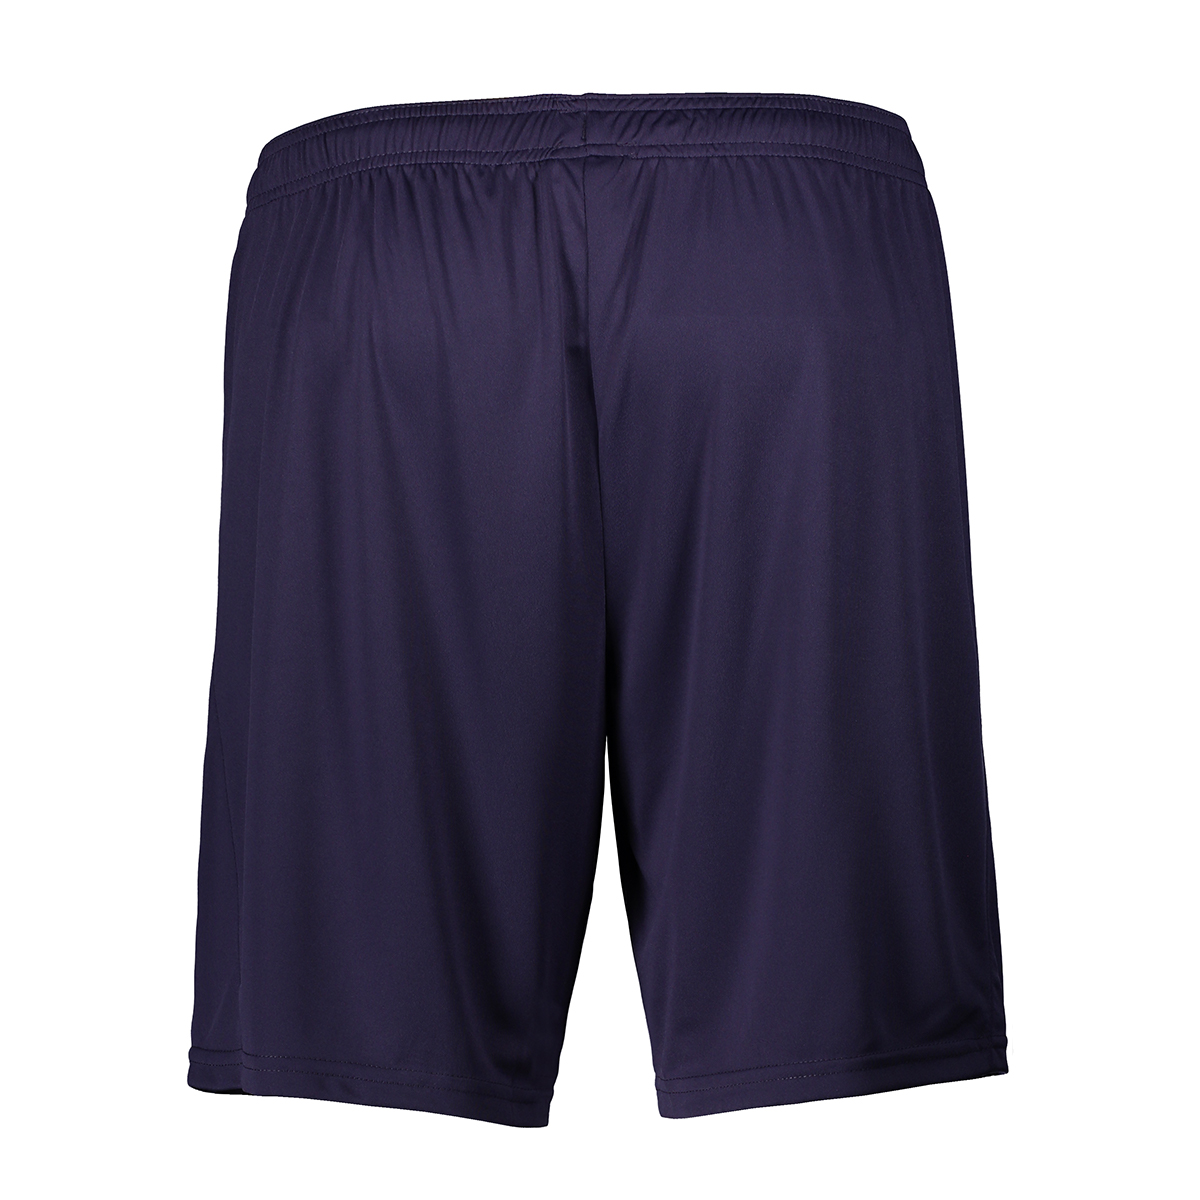 RSCA Training Short 2020/2021 is-hover